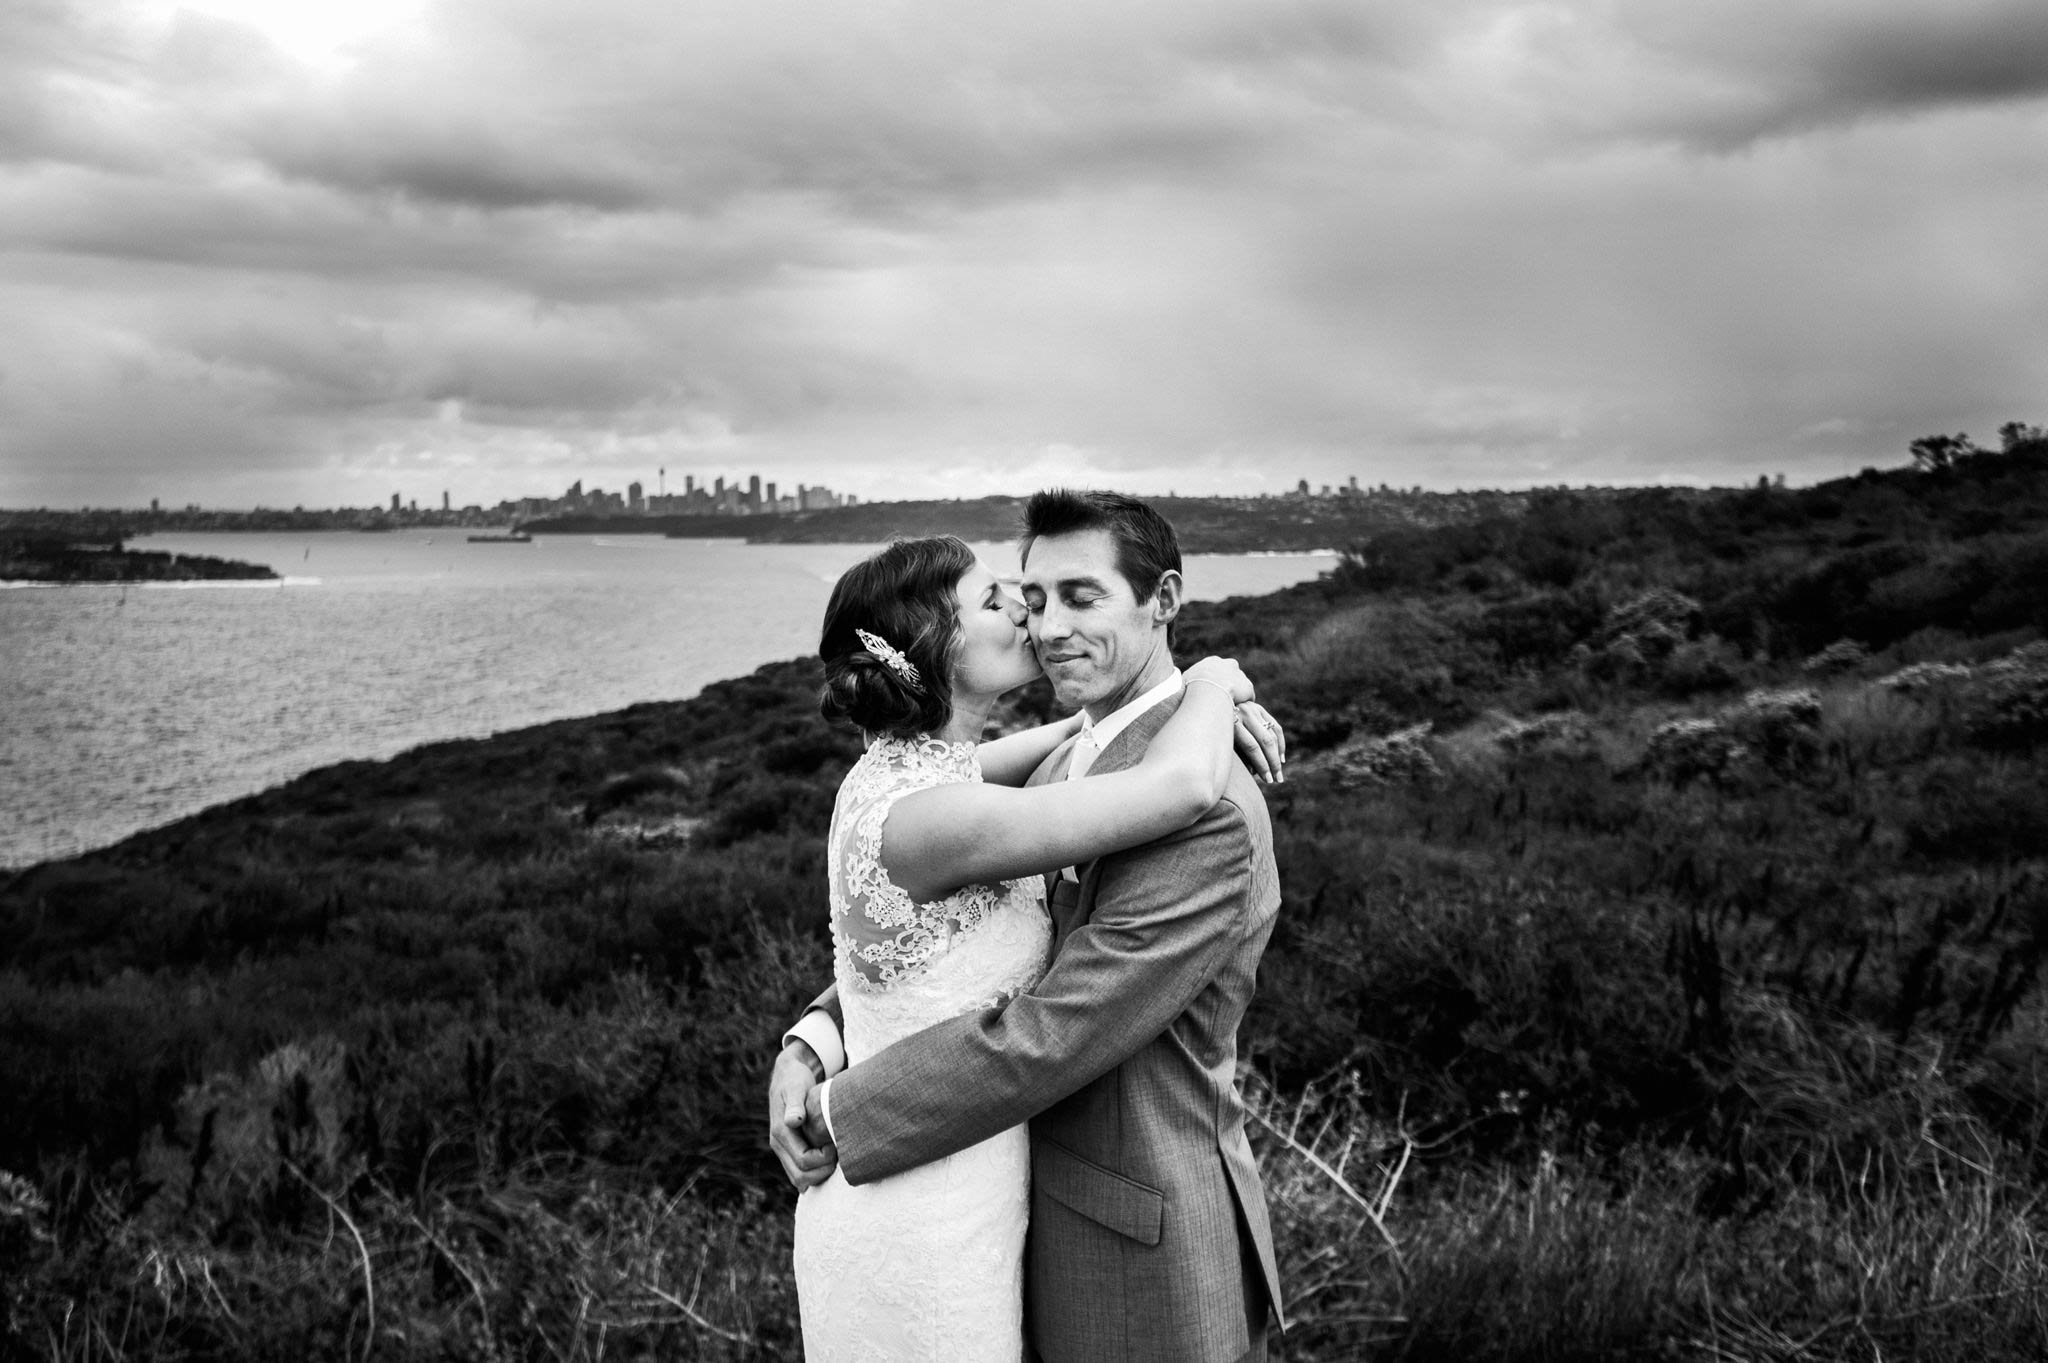 Northern beaches weddings - North Head, Manly